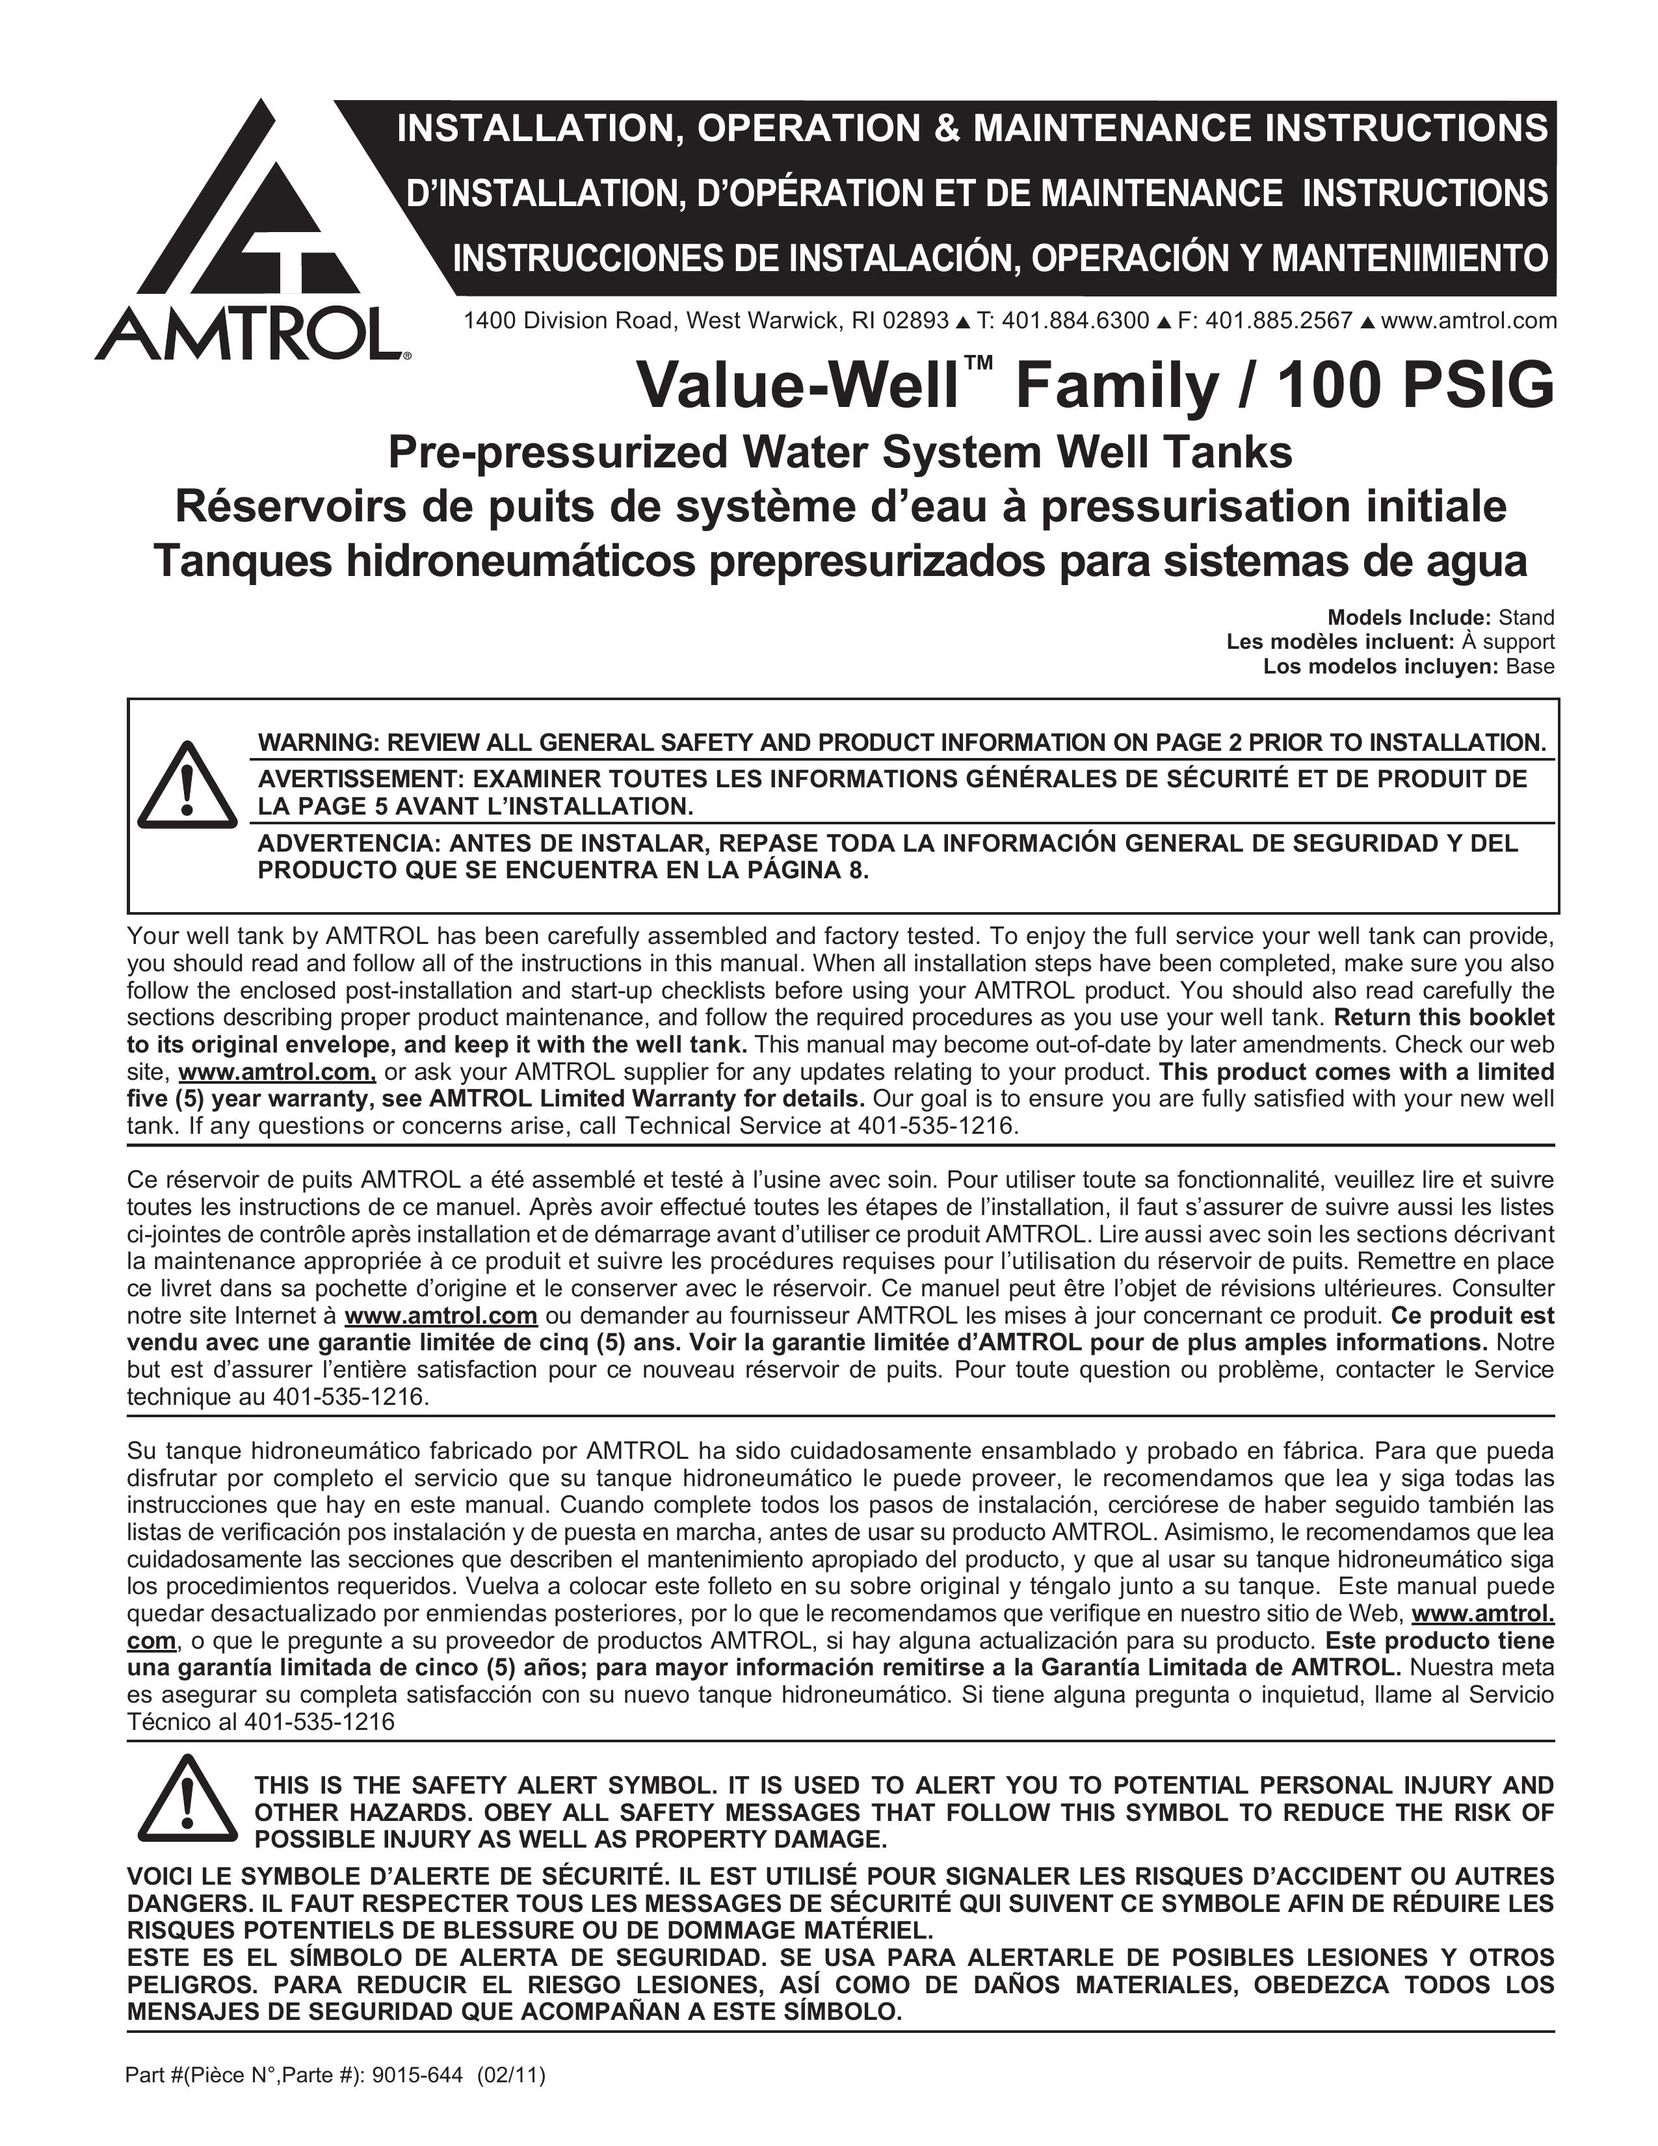 Amtrol 100 PSIG Water System User Manual